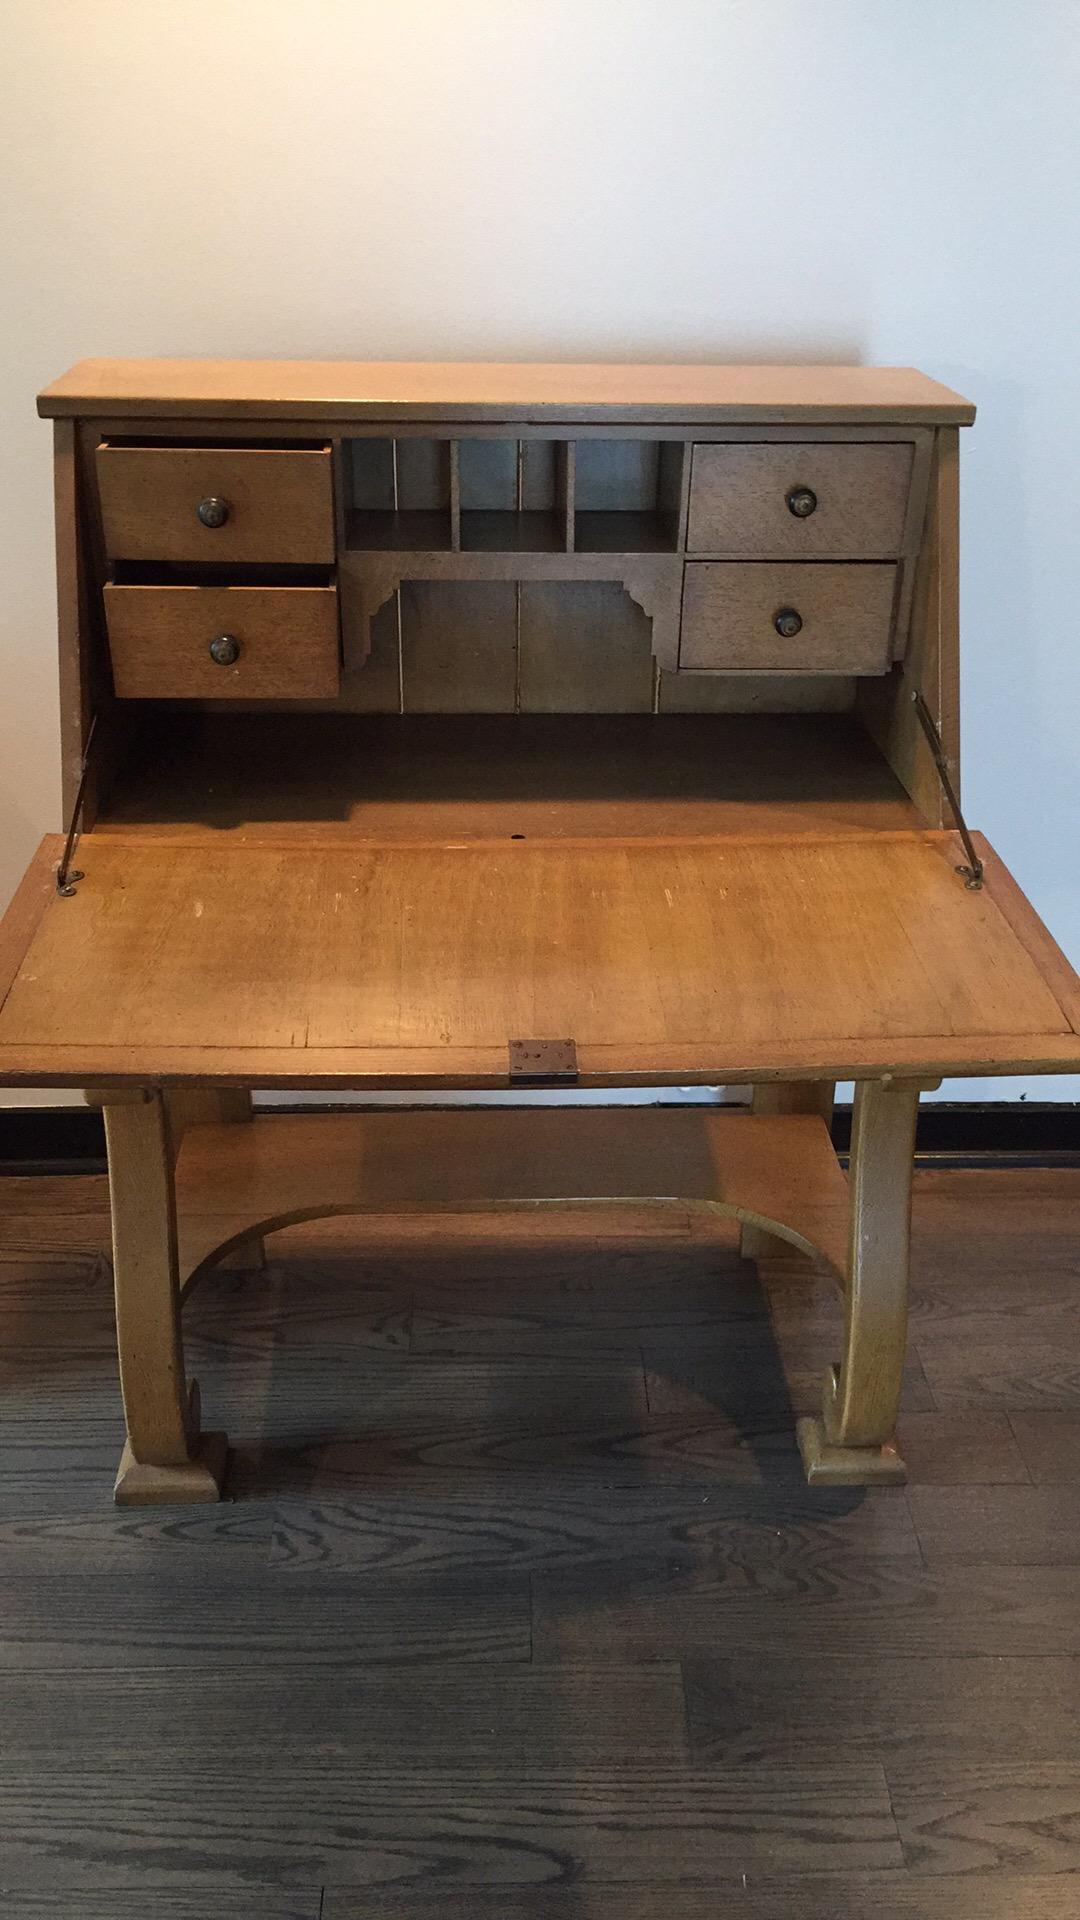 1930s vintage French secretary desk
Handmade while our father was overseas in WW2 - the father of an French girlfriend gave this to him and he fell in love 
Gorgeous blonde wood, details a plenty 
elegant and versatile 

Measures: 32 W x 29.5 deep